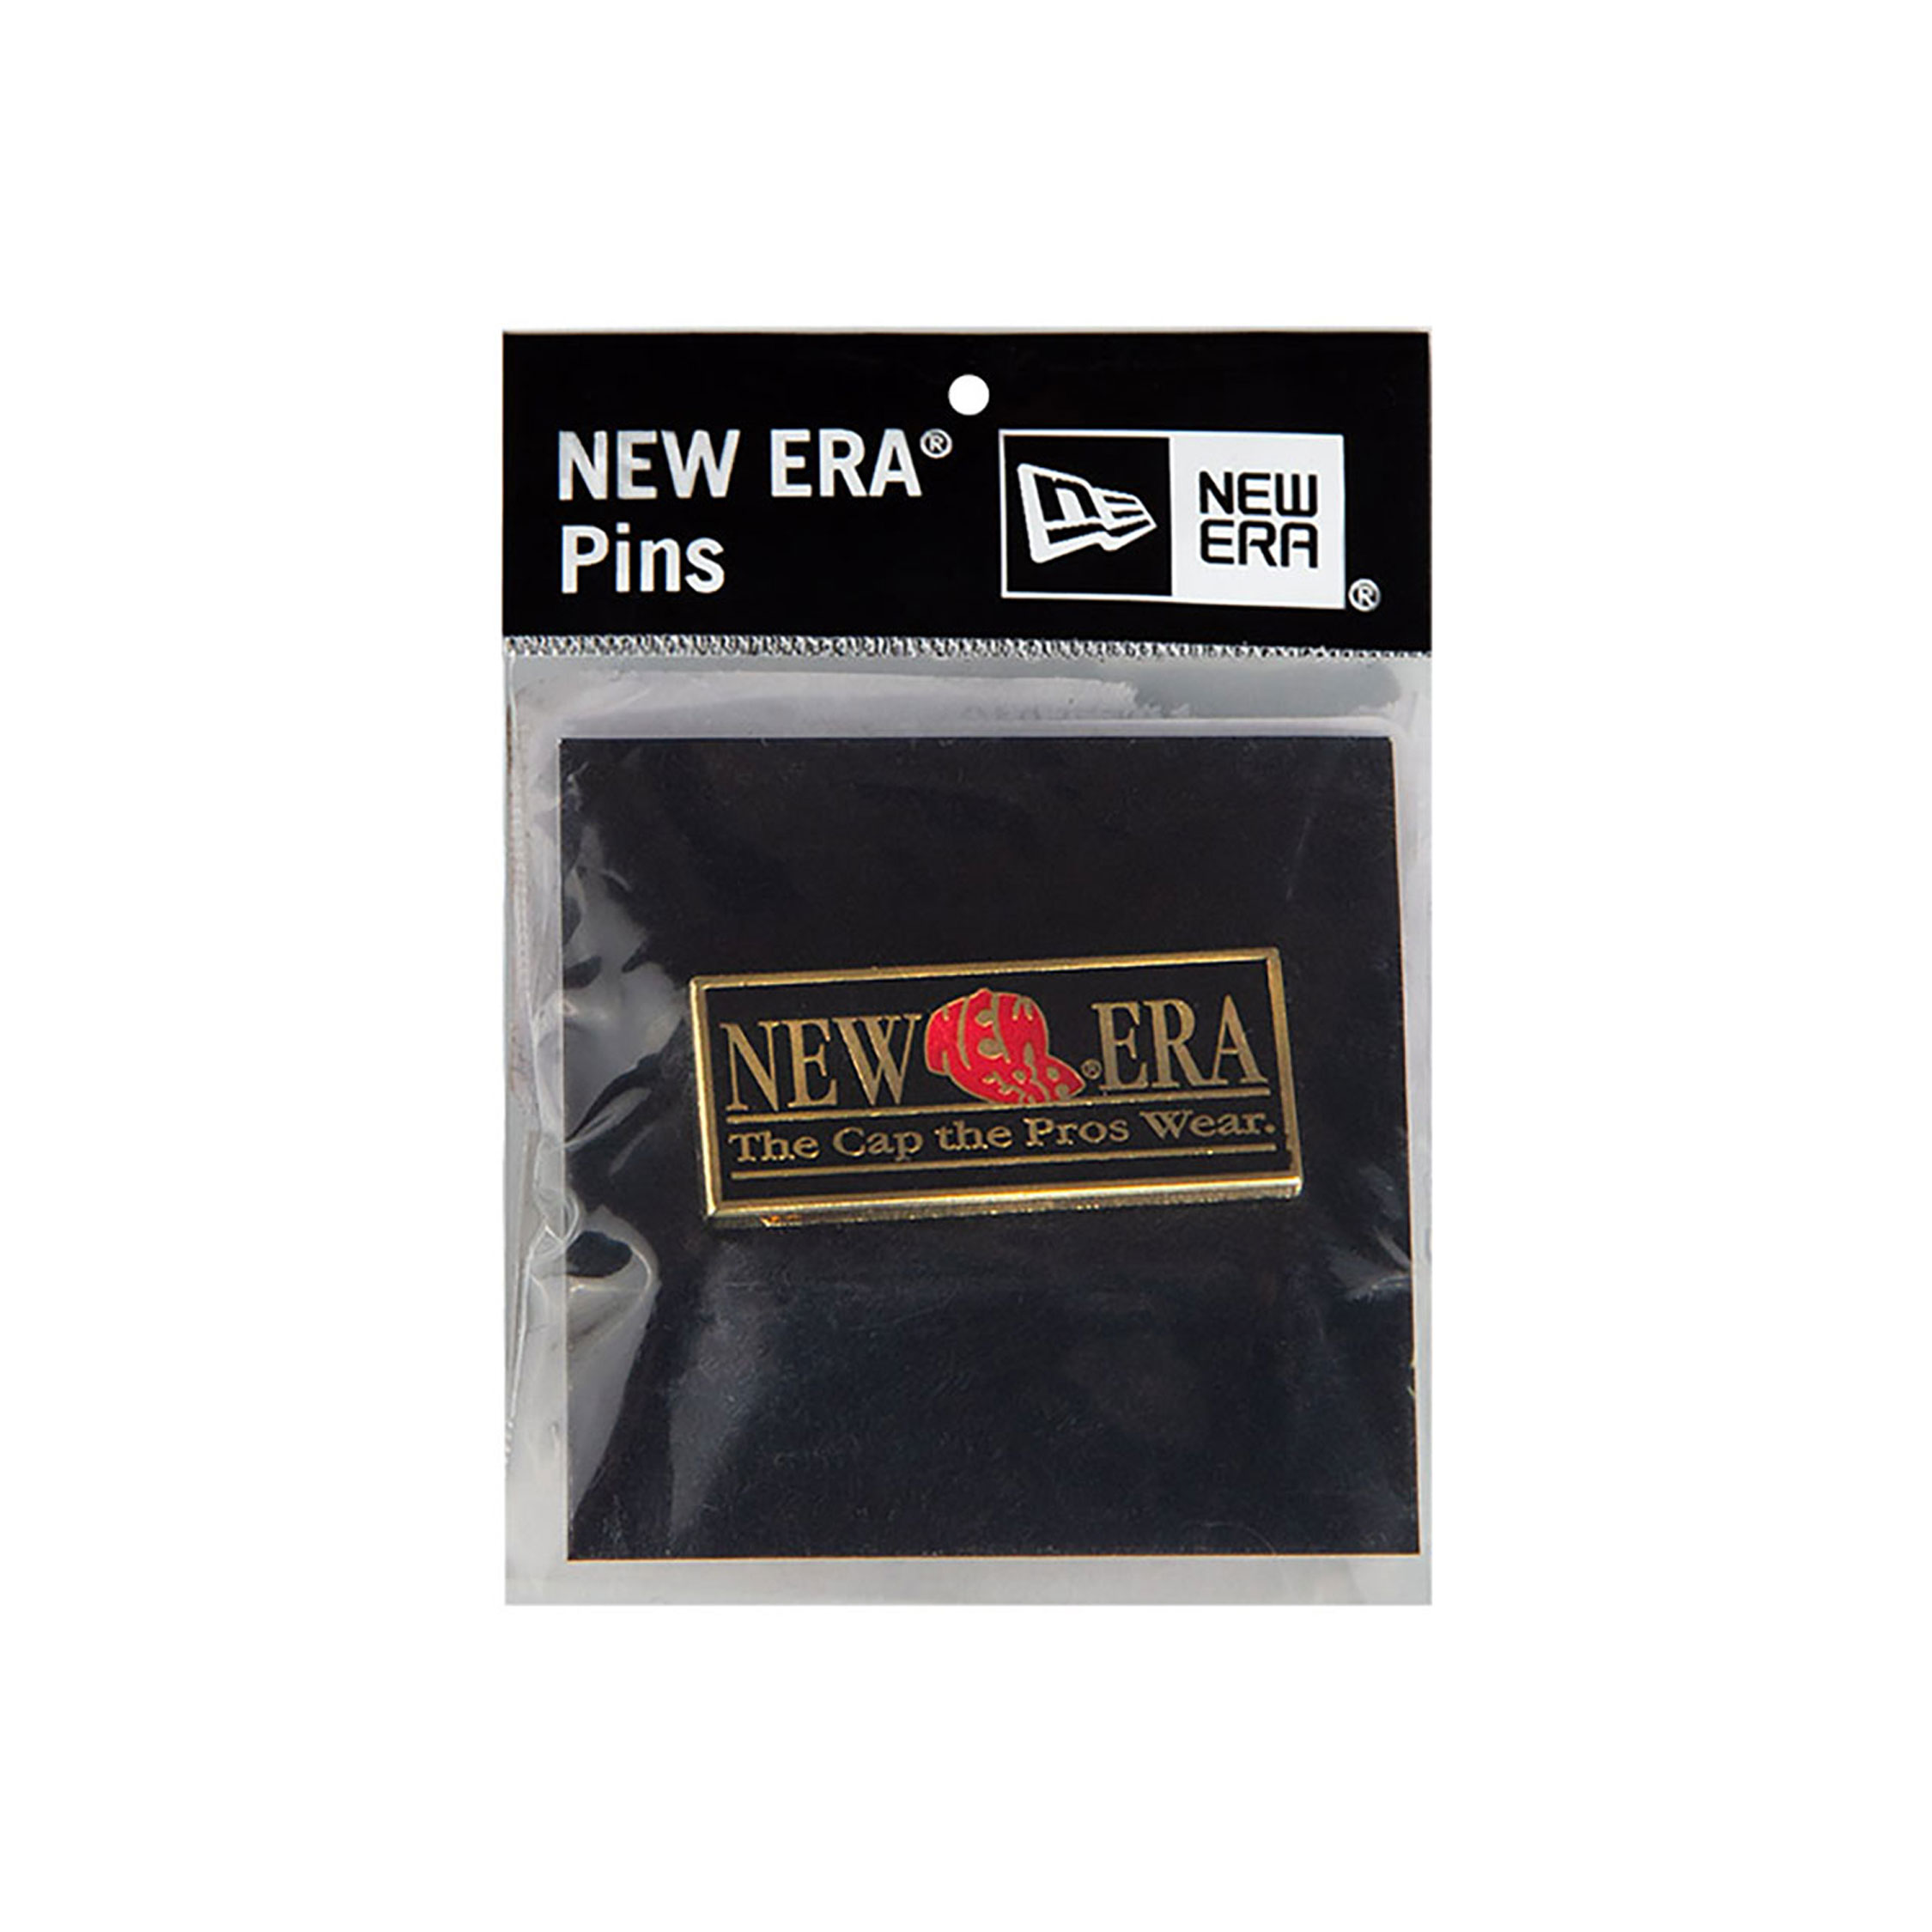 New Era The Pros Wear Black and Gold Pin Badge